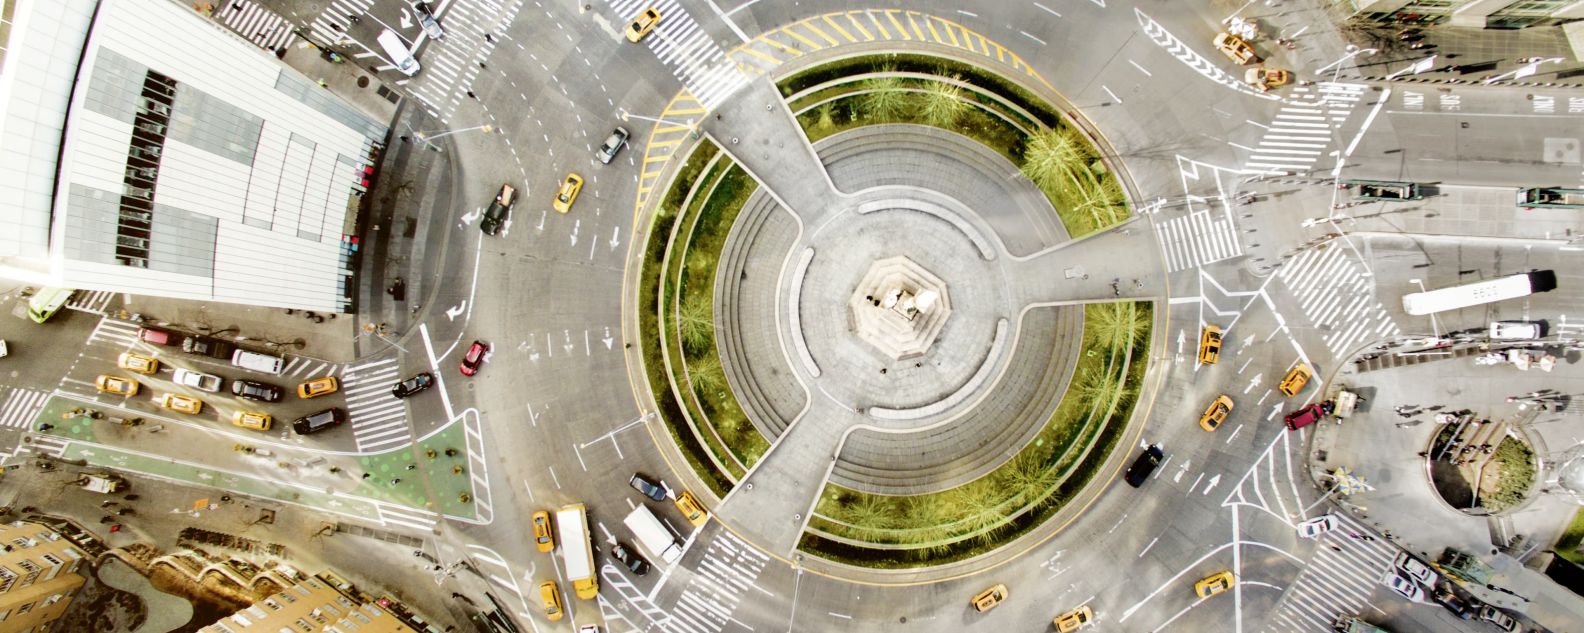 Aerial view of a roundabout in a city